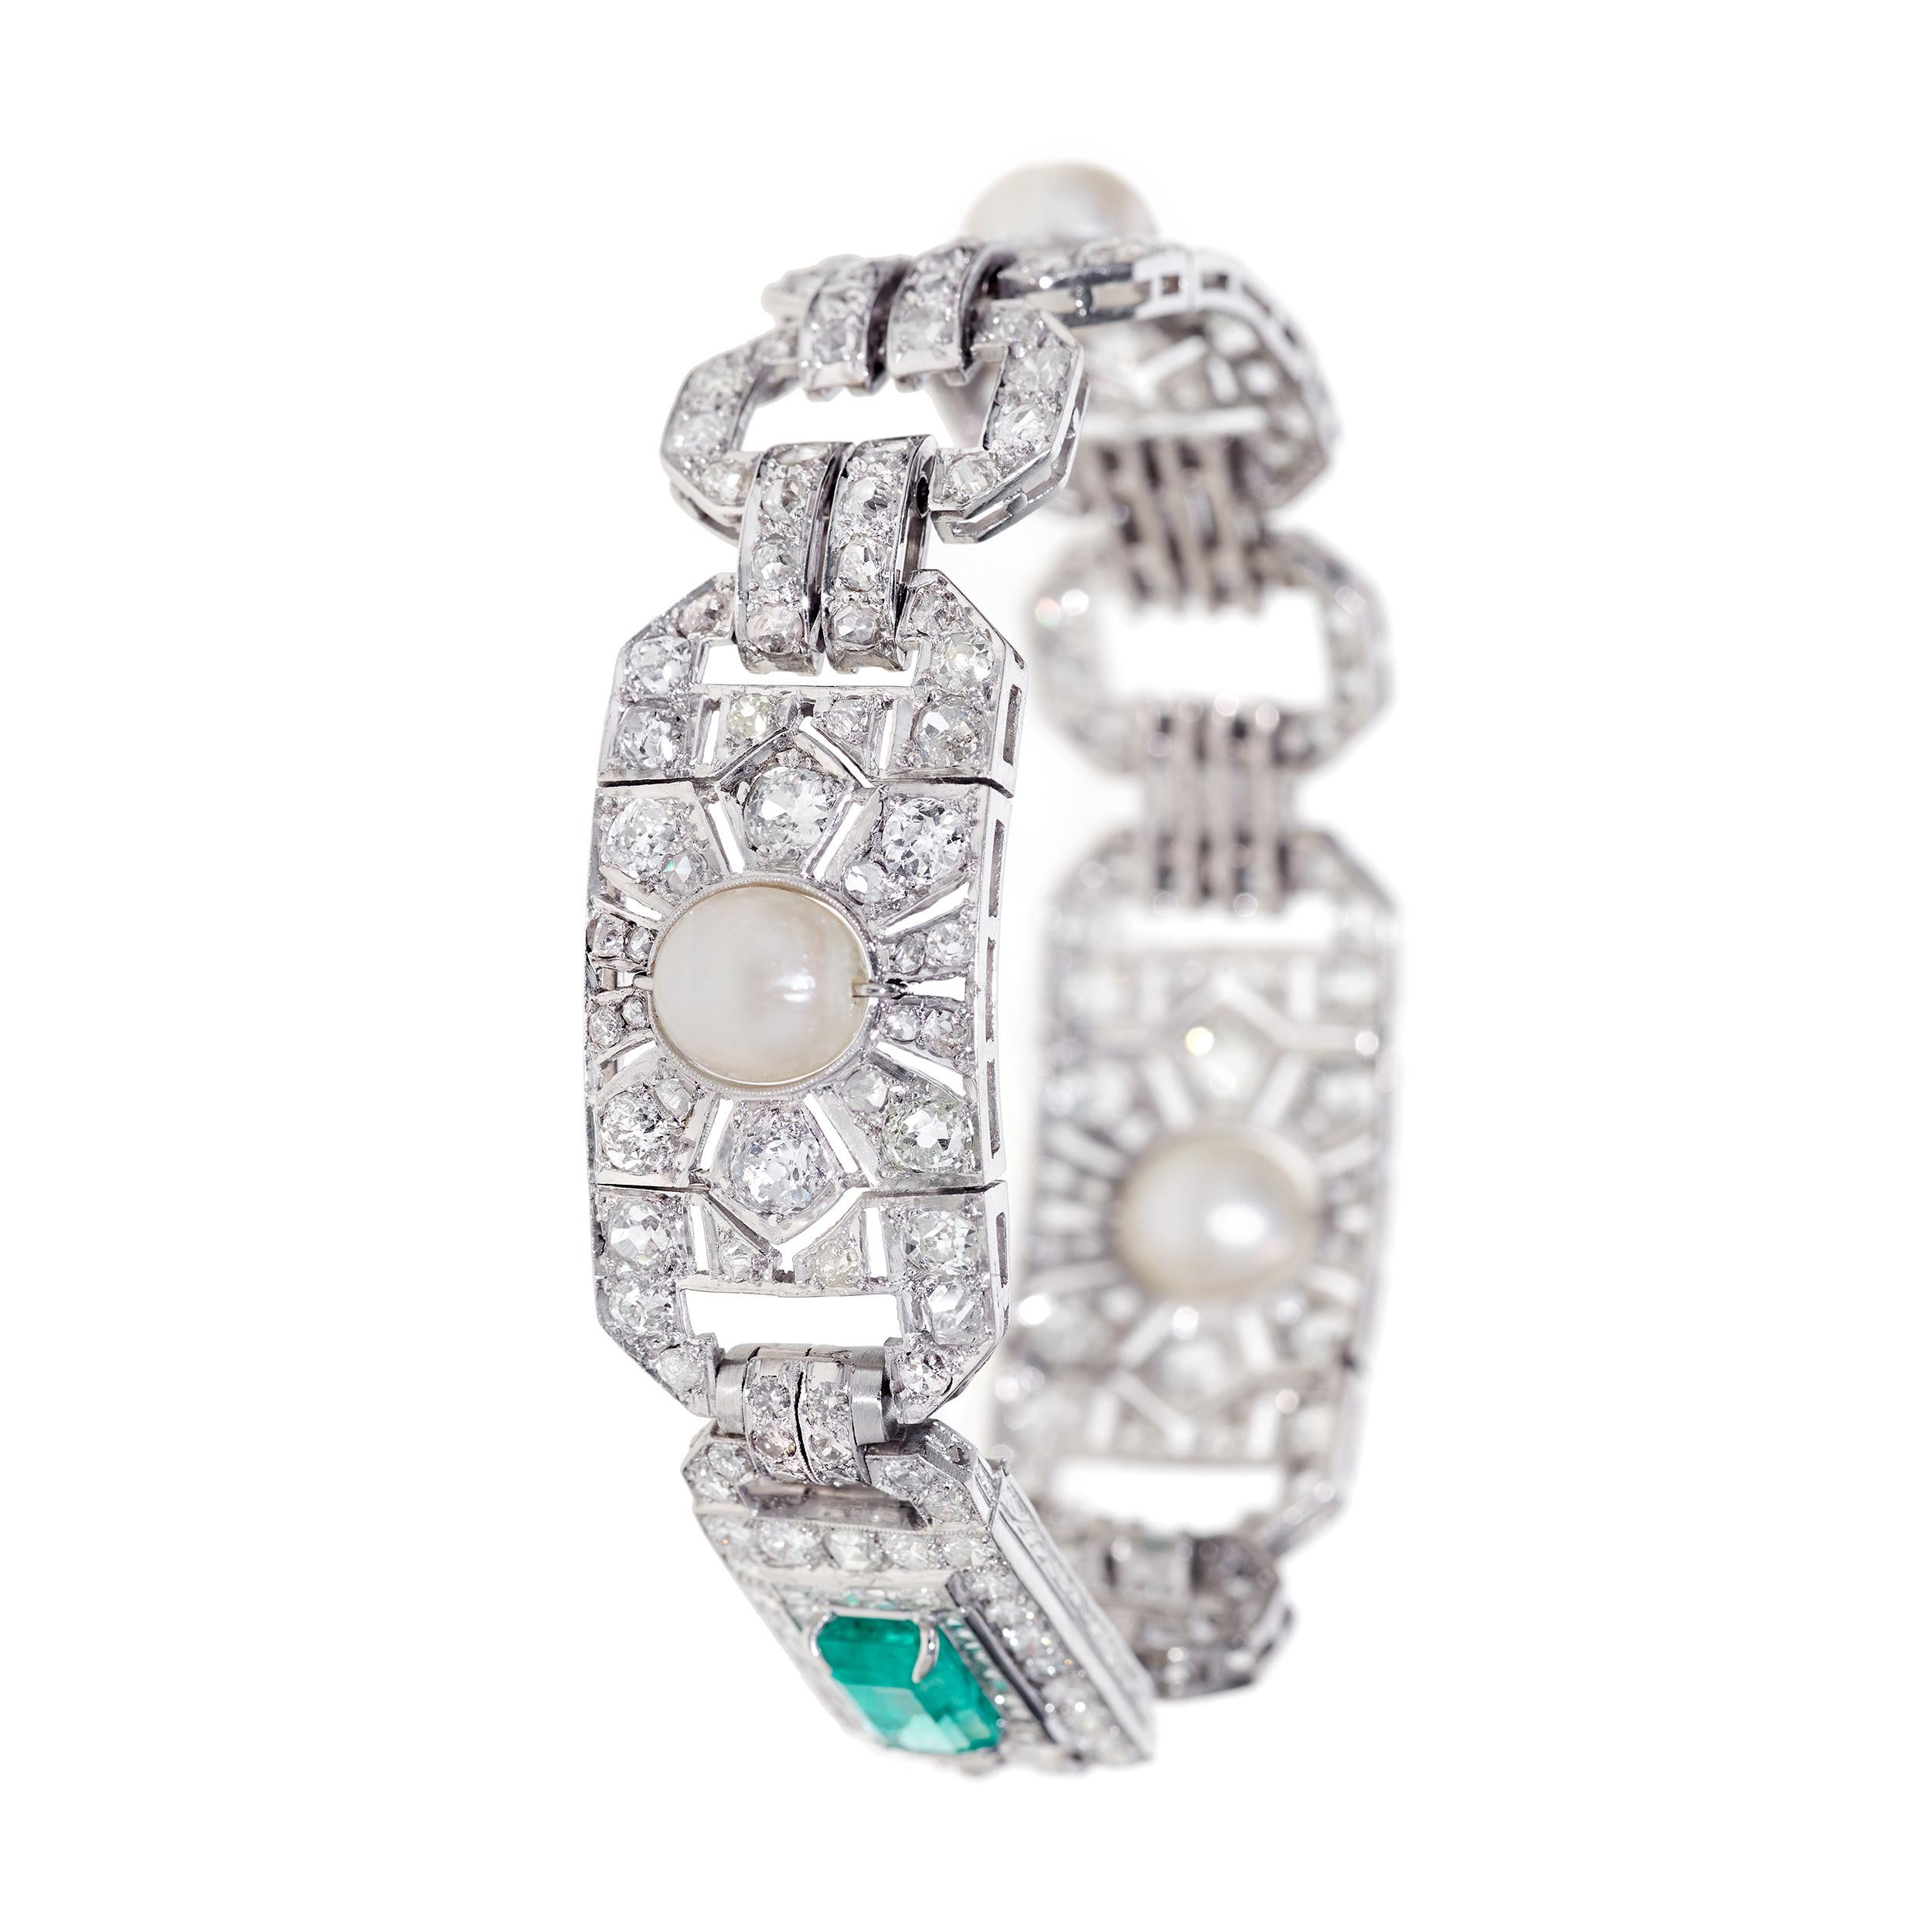 The Monroe bracelet just makes you feel glamorous whether worn with jeans or all dressed up.  This Edwardian Bracelet has been brought to new life through a full refurbish and the addition of a 2.64 Carat Emerald Cut Emerald that makes a statement